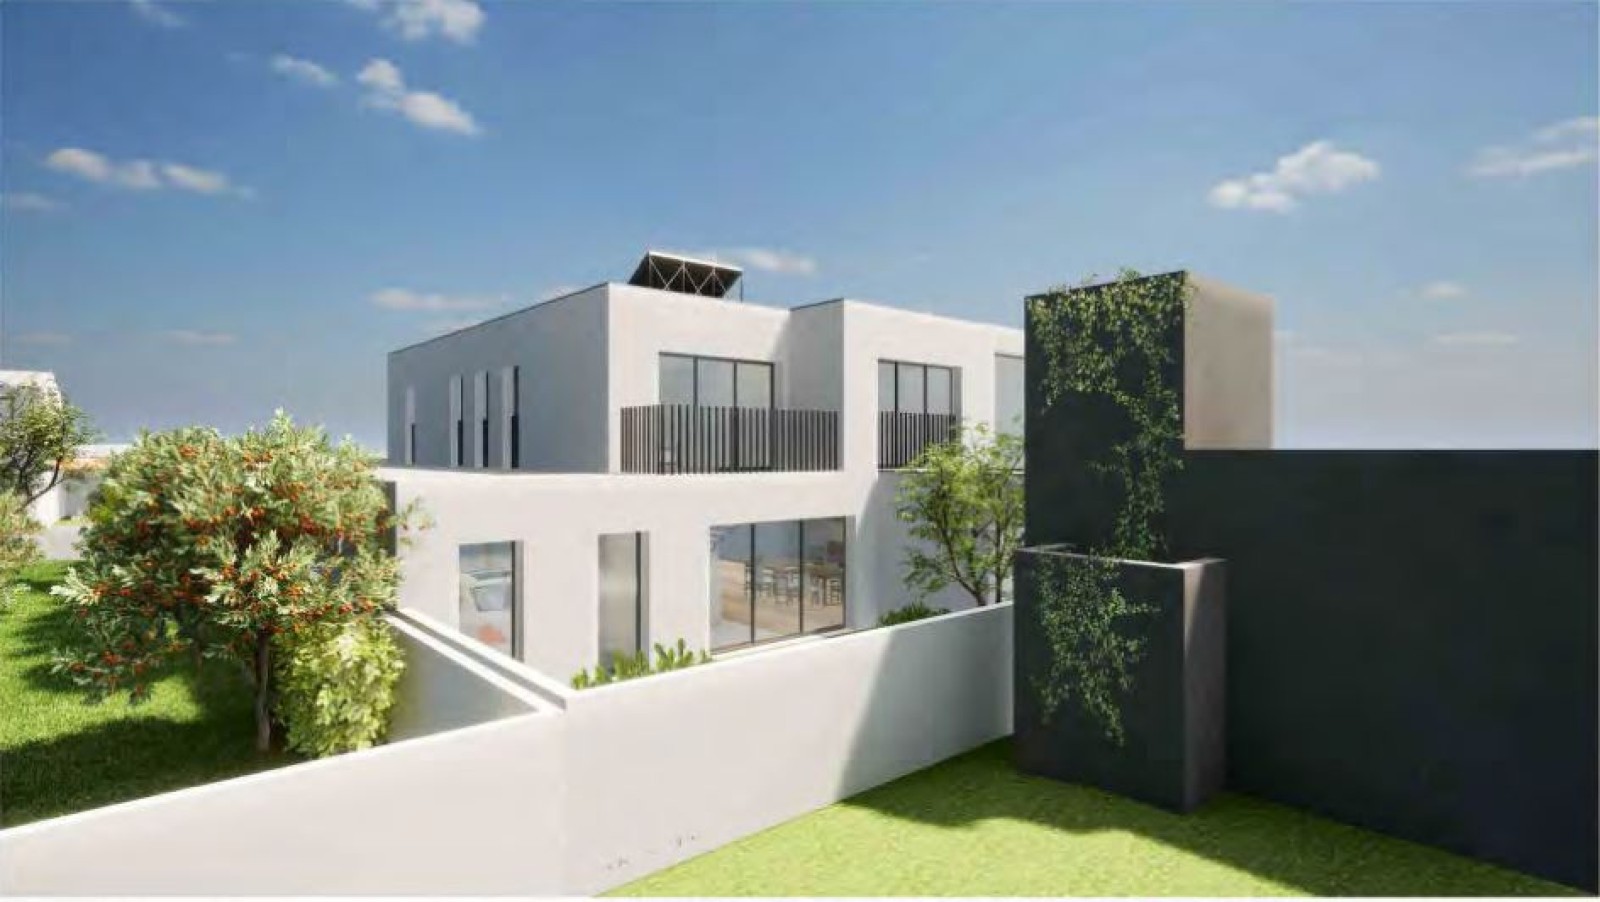 3 bedroom villa with balconies near the beach, for sale, Gaia, Portugal_243393